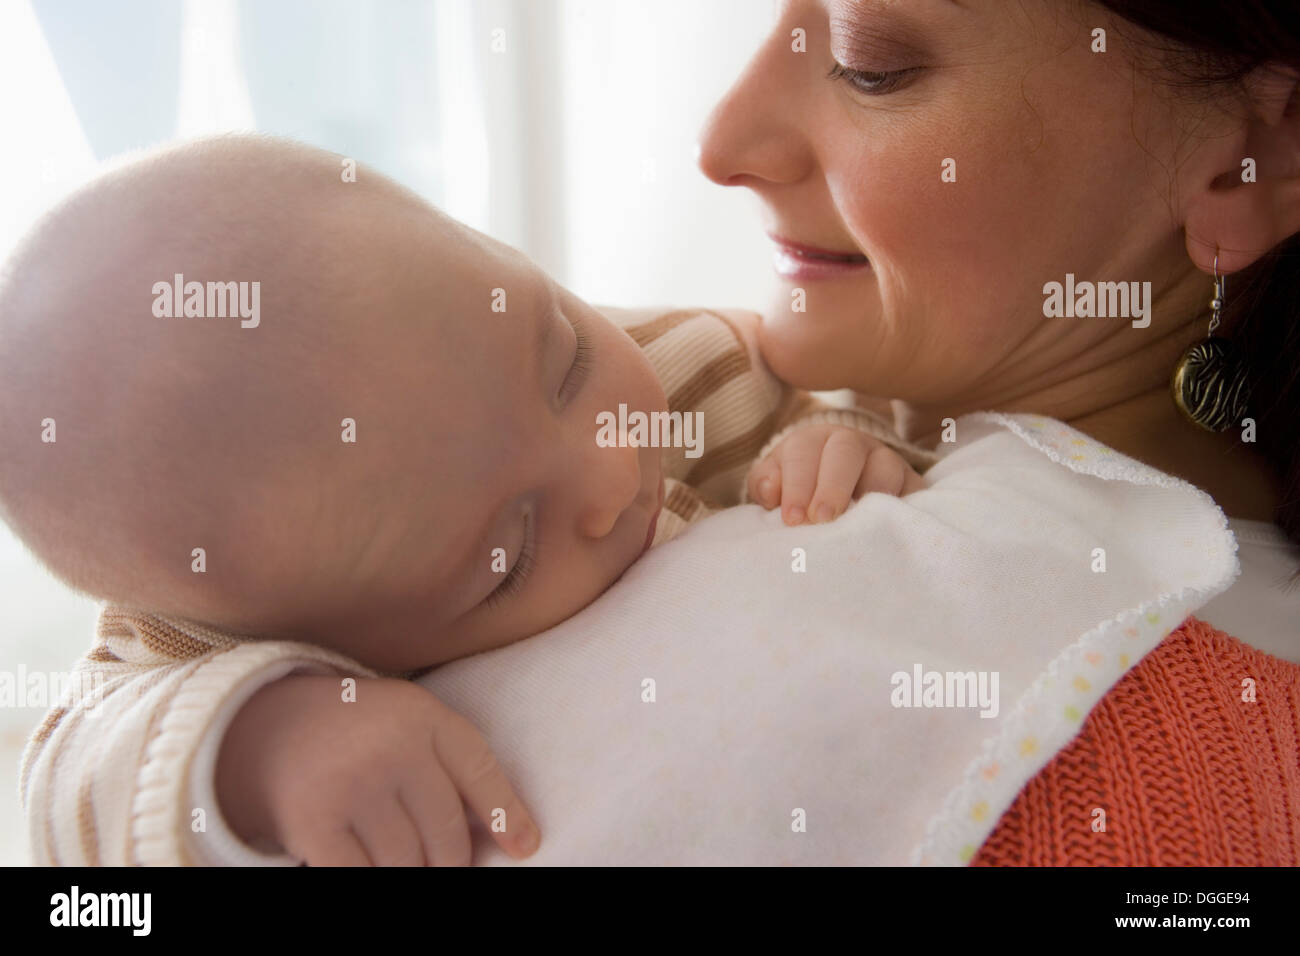 Baby boy sleeping on mother's shoulder, close up Stock Photo